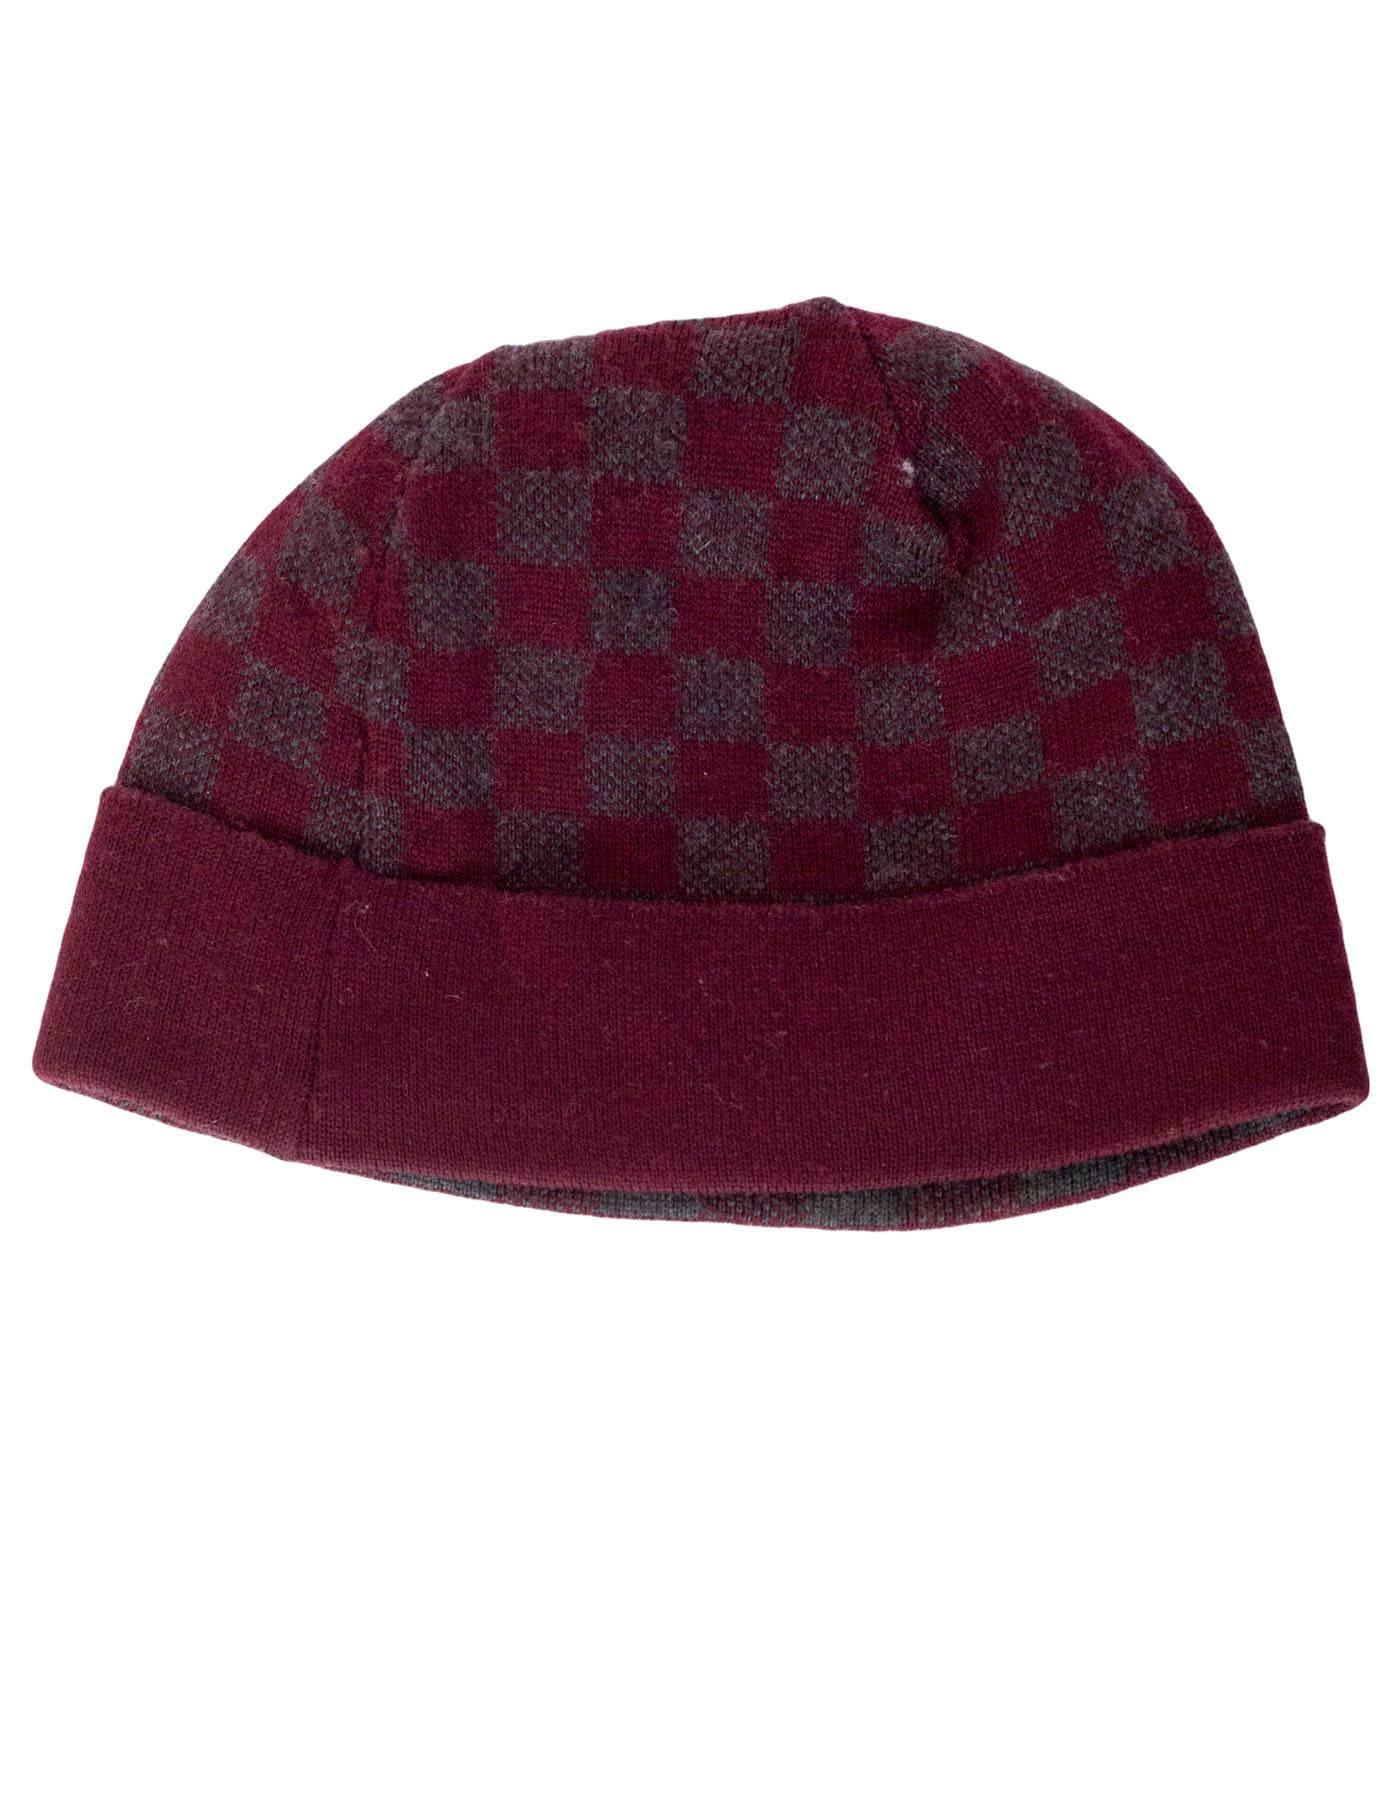 Louis Vuitton Burgundy & Grey Wool Bonnet Petit Damier Beanie
Features LV knit on front of beanie

Made In: Italy
Color: Beige and tan
Composition: 100% wool
Overall Condition: Excellent pre-owned condition

Measurements: 
Circumference: 22"